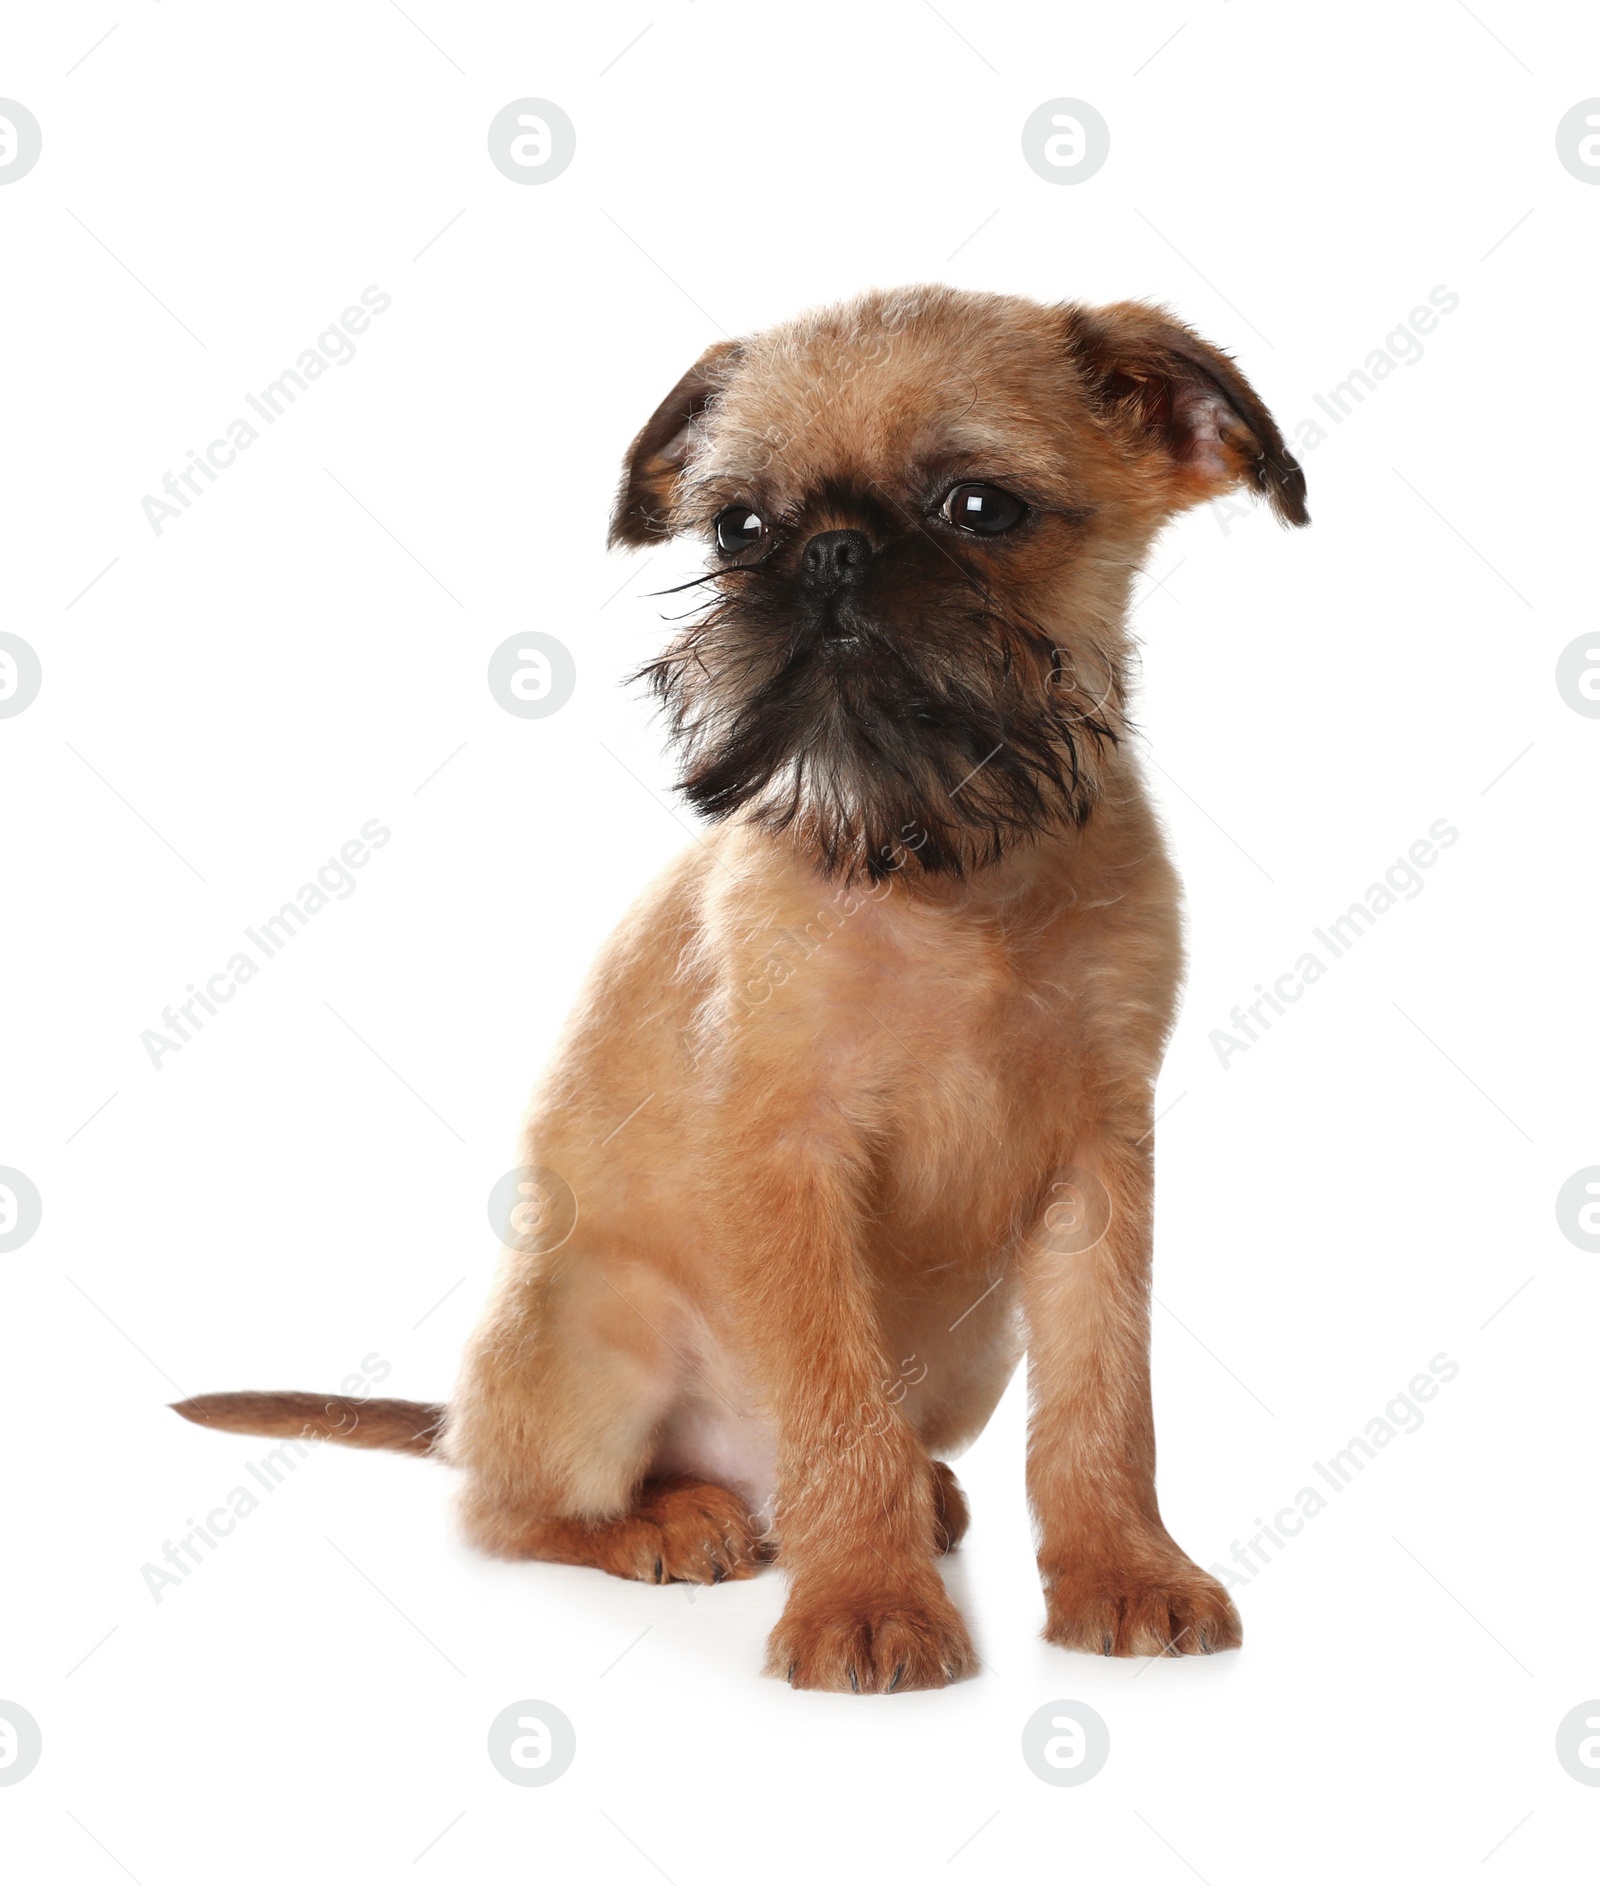 Photo of Studio portrait of funny Brussels Griffon dog looking into camera on white background